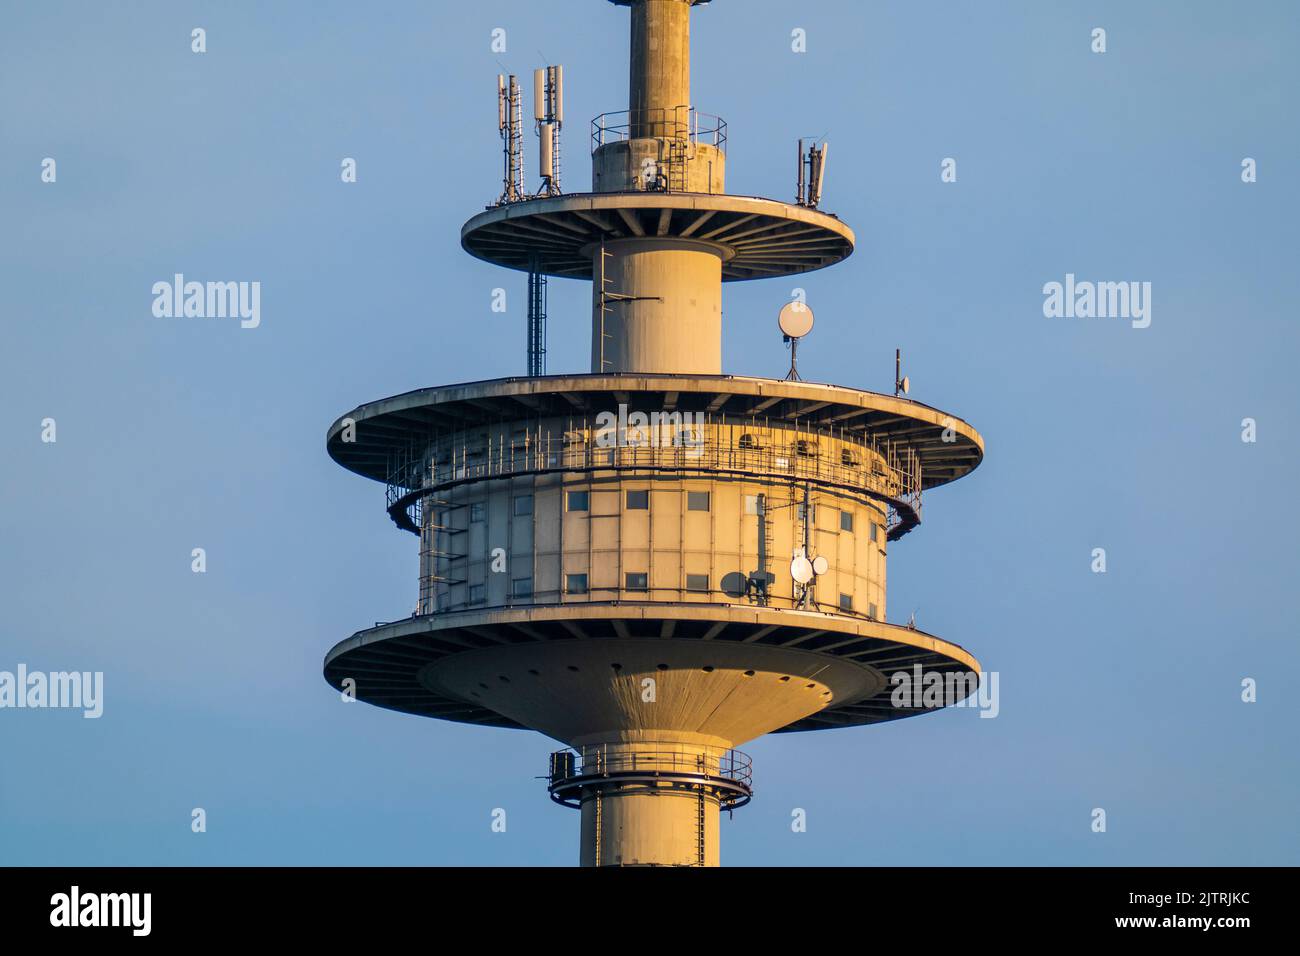 Close-up of the platform of a TV tower in front of a blue sky Stock Photo